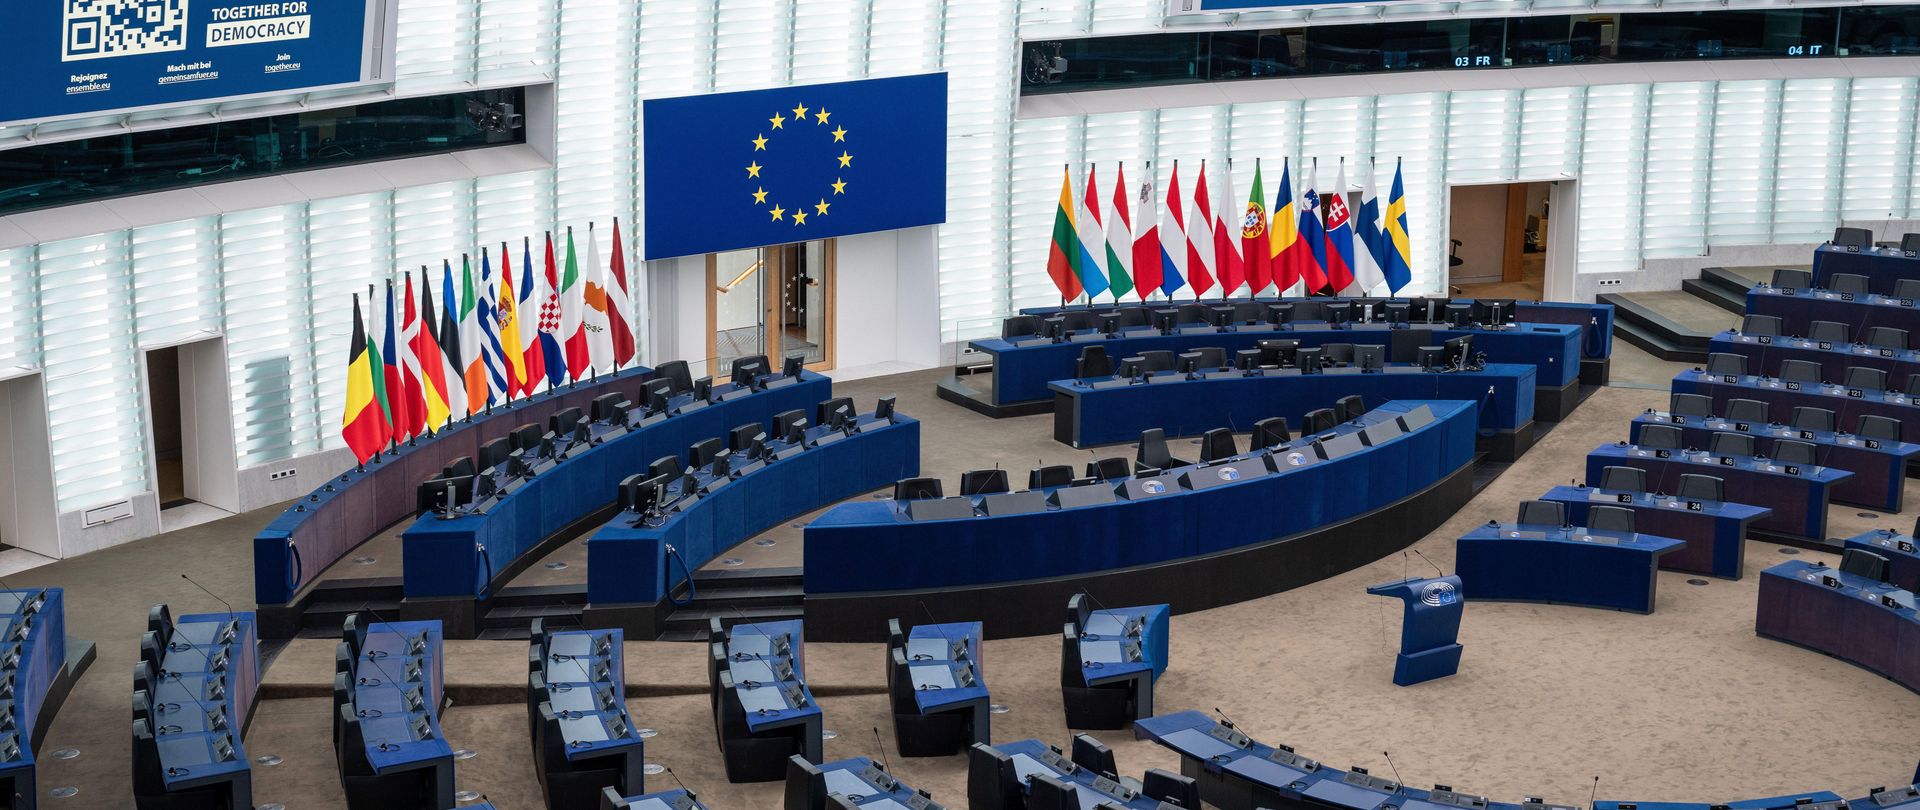 Plenary Chamber of the European Parliament in Strasbourg.